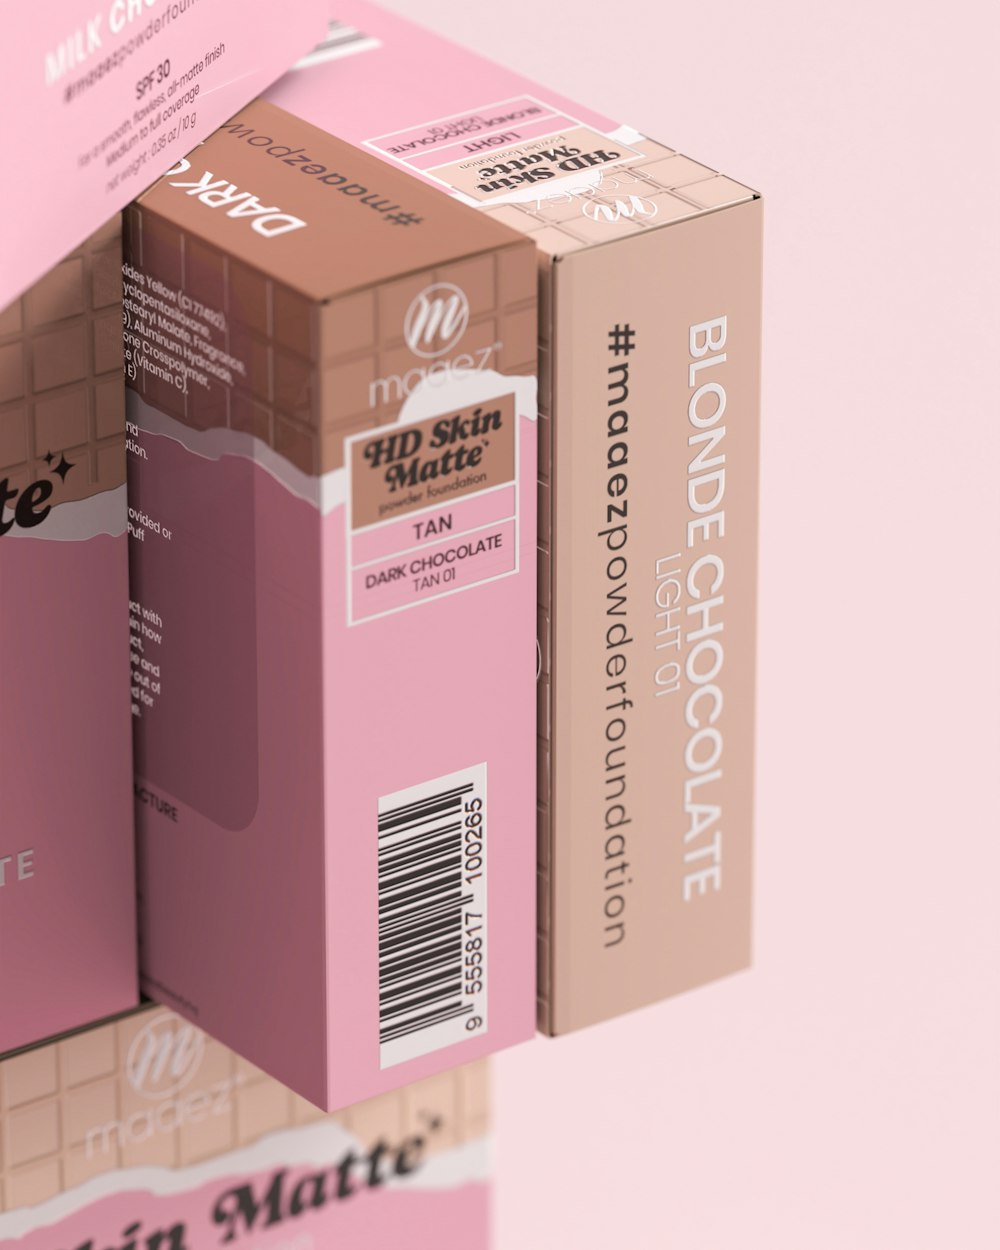 two boxes of pink chocolate are stacked on top of each other